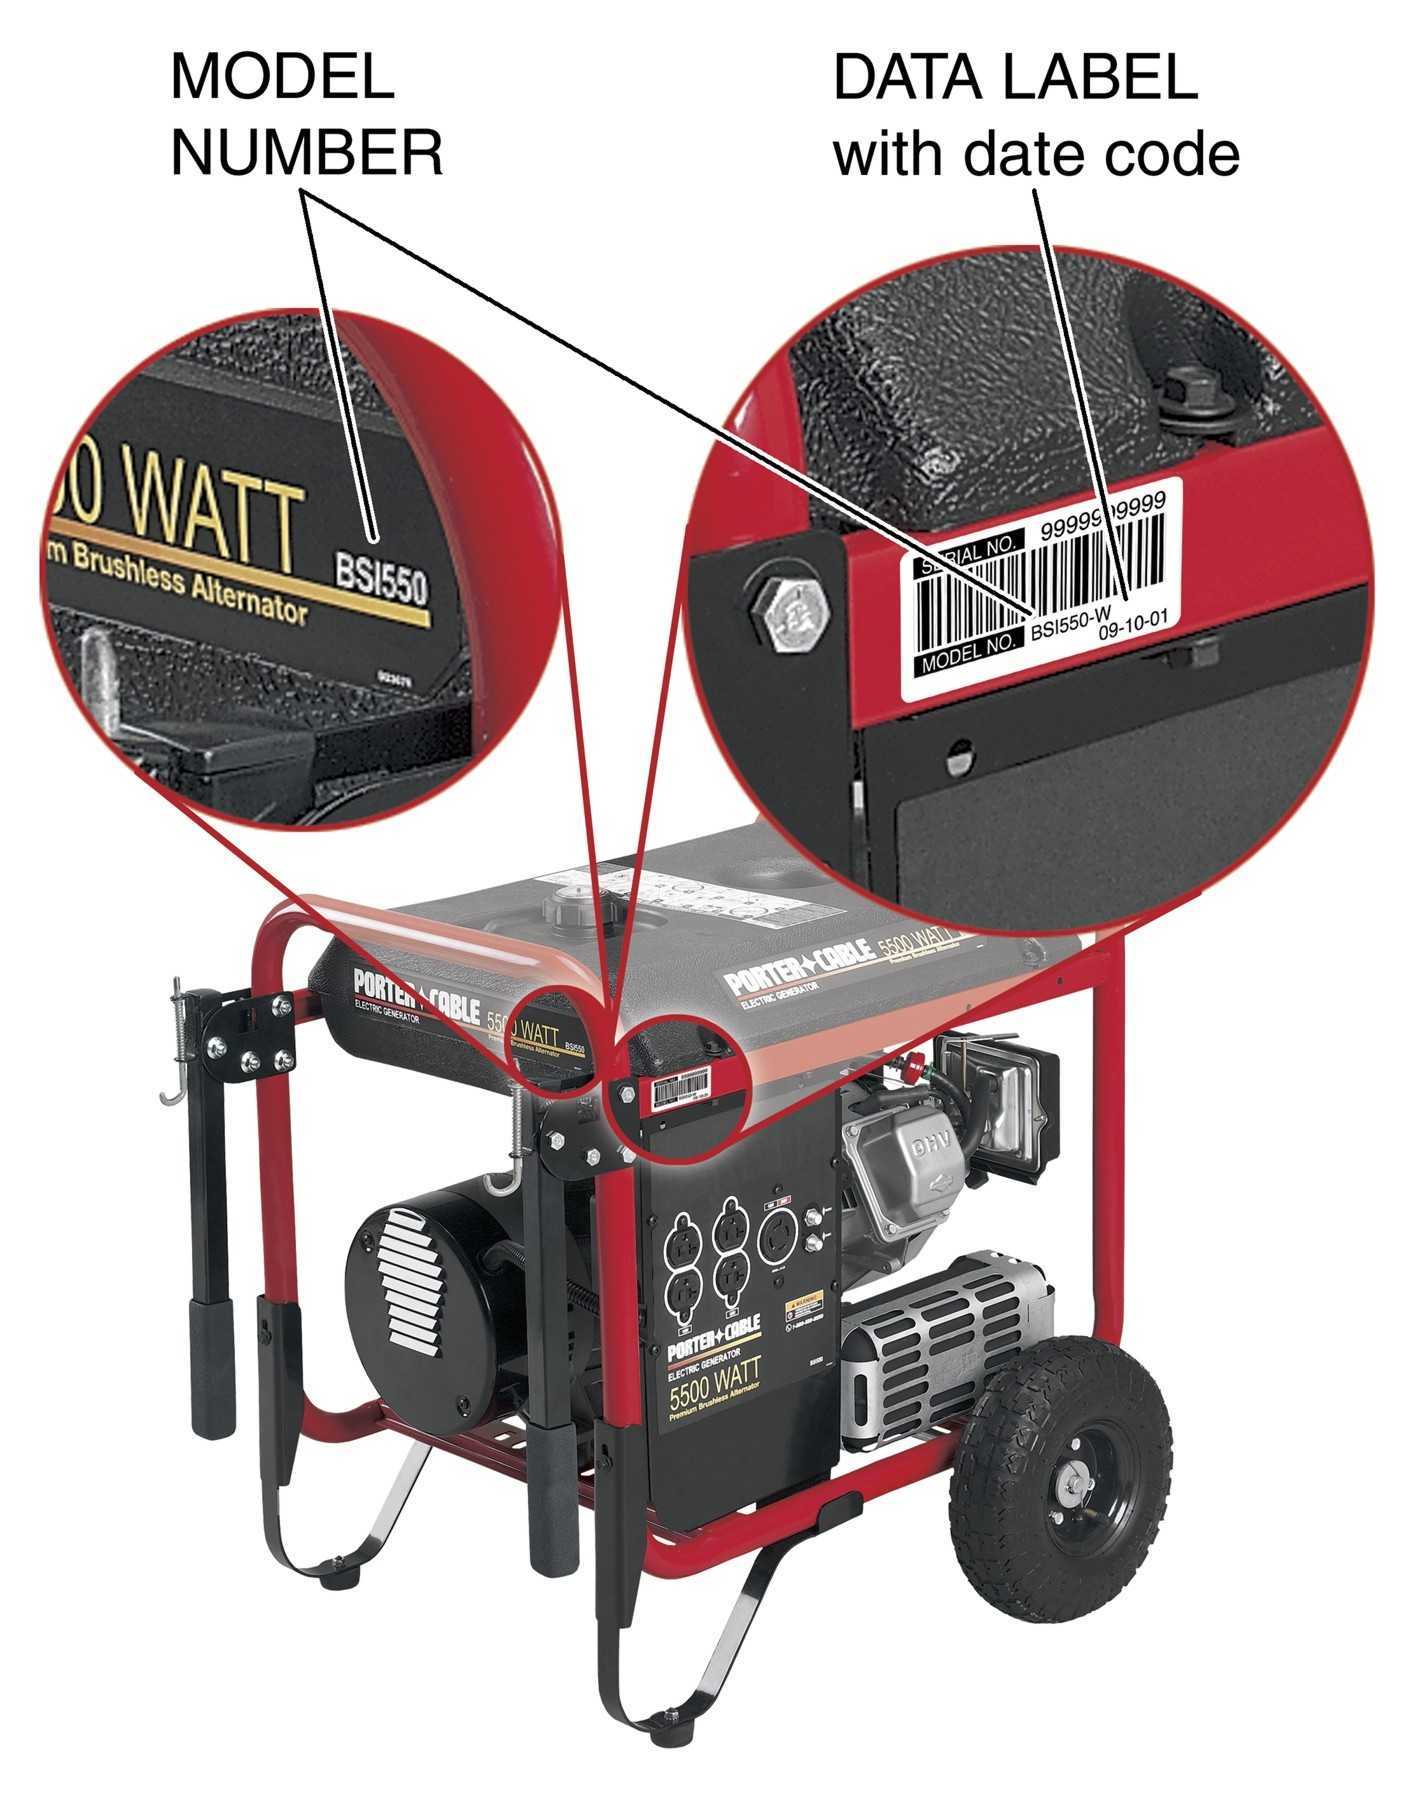 Cpsc Devilbiss Air Power Co Announce Recall Of Porter Cable Portable Generators